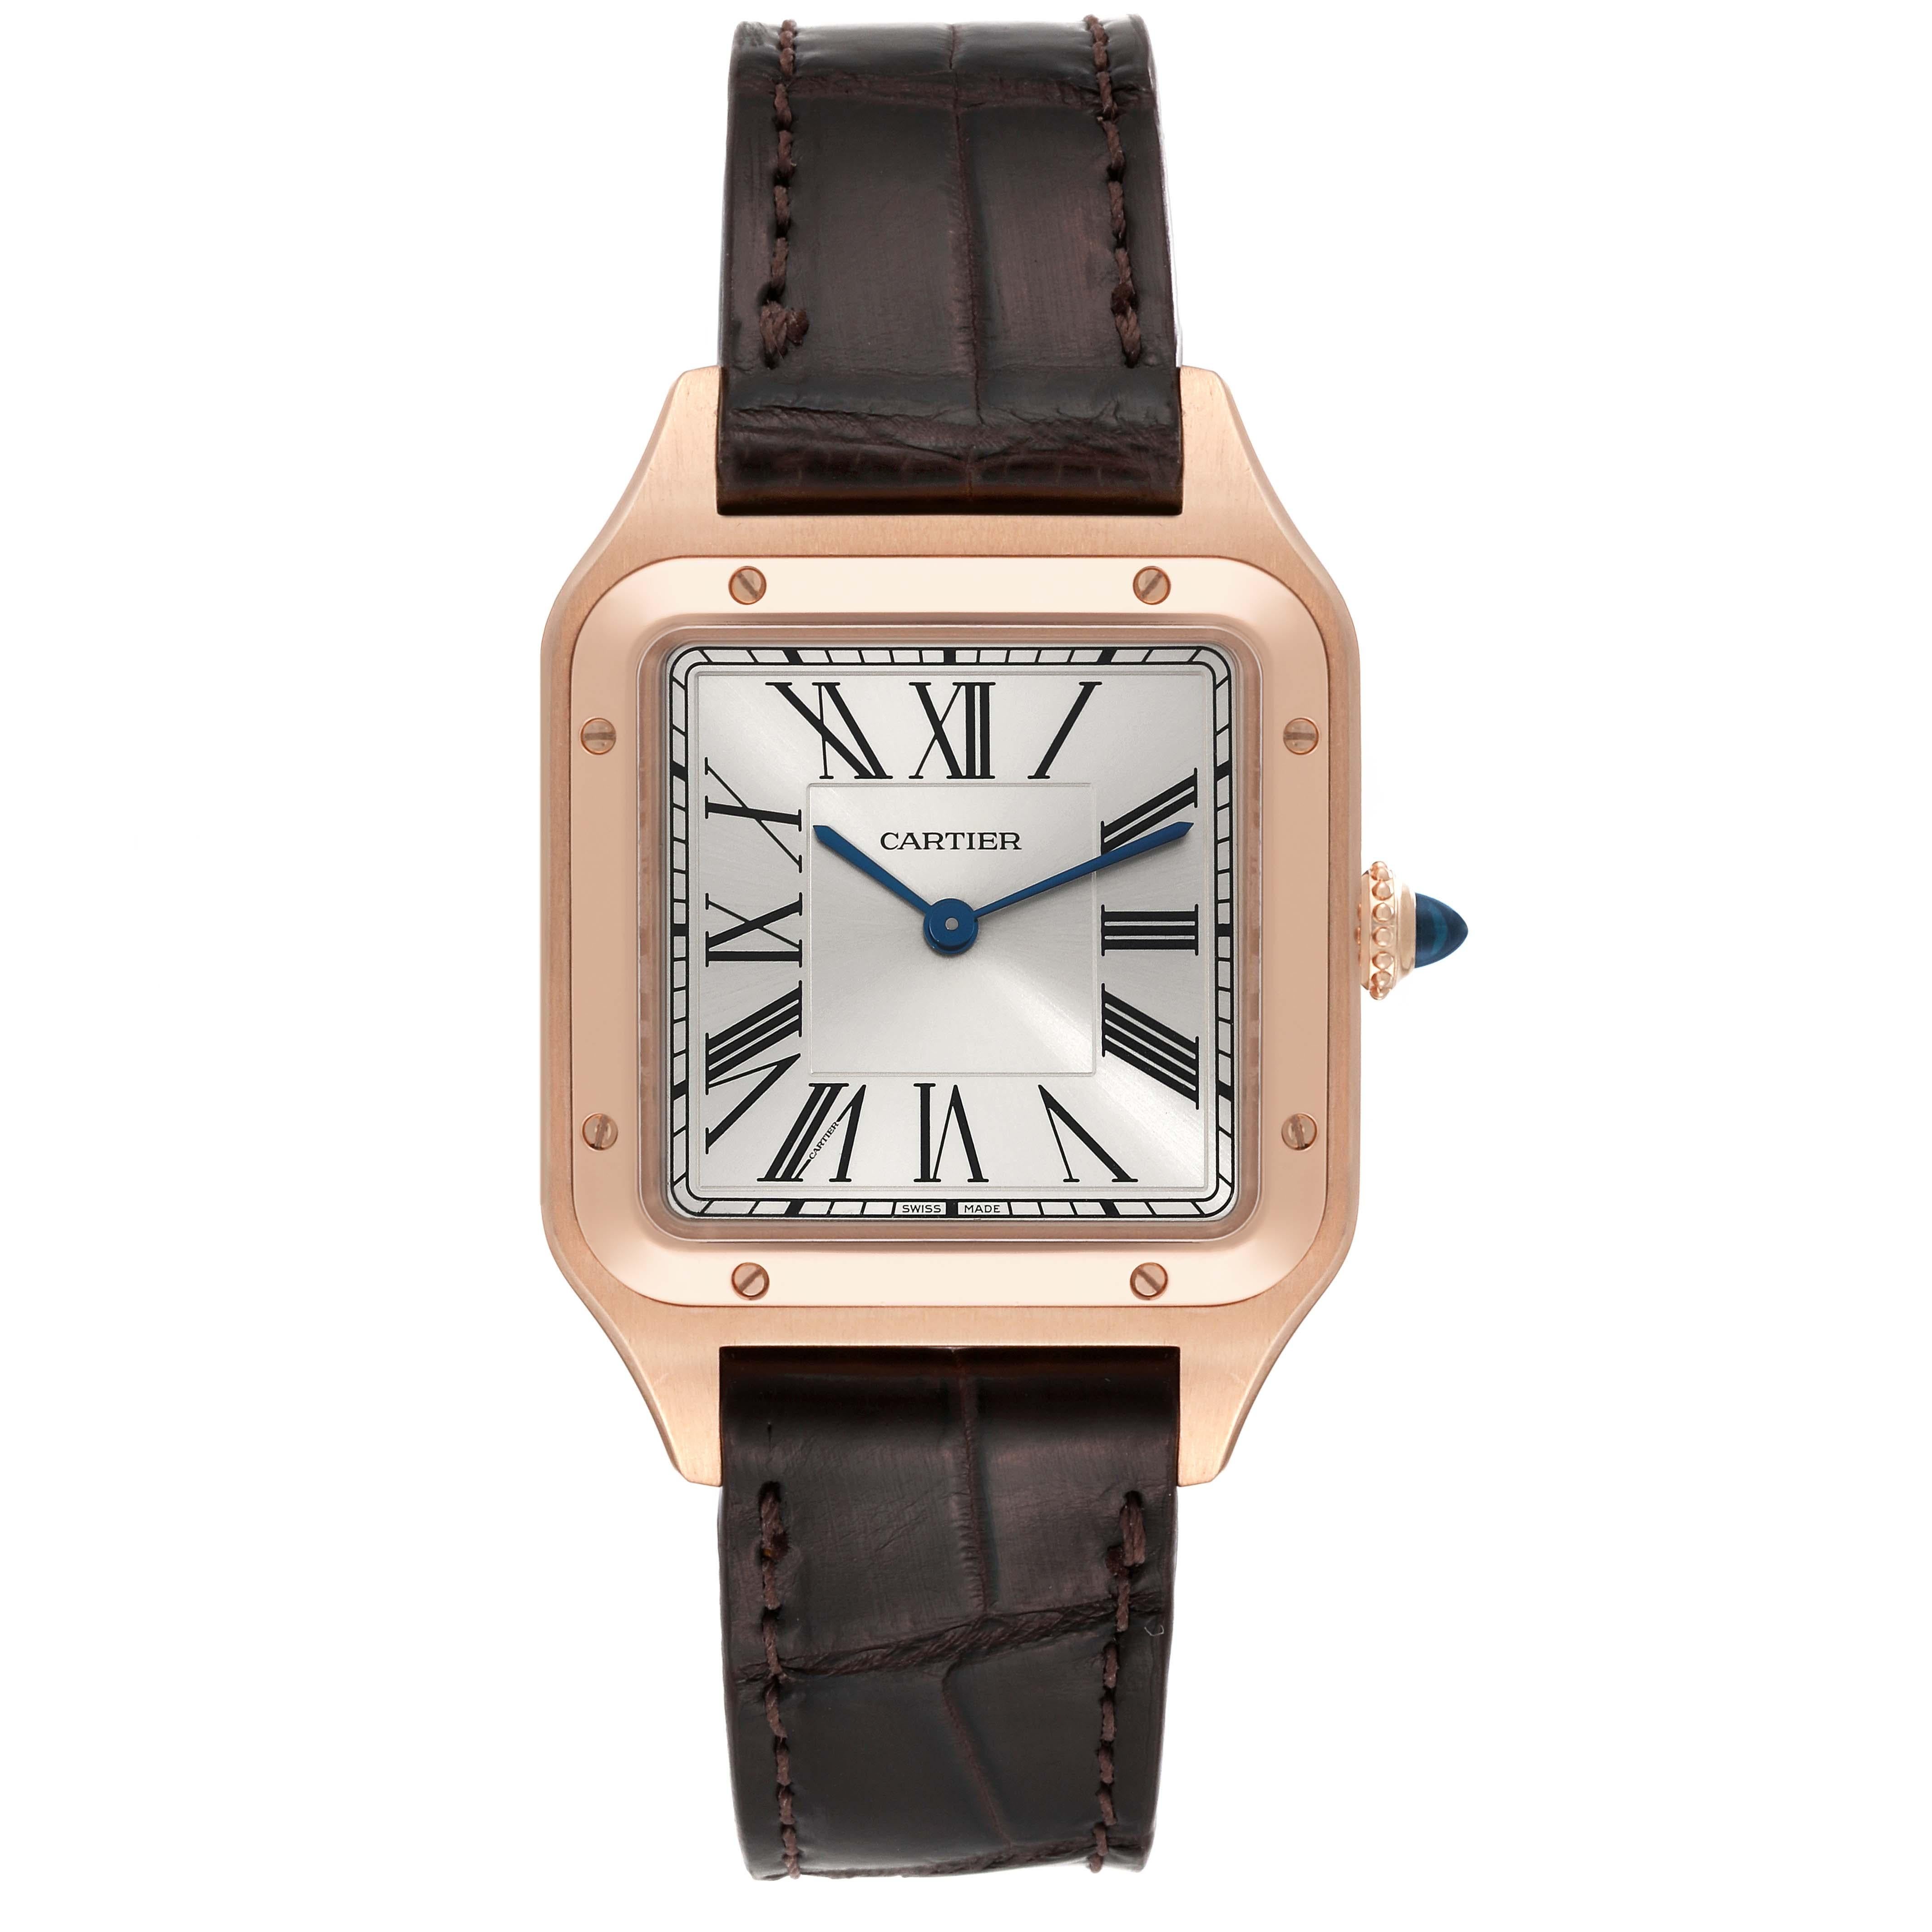 Cartier Santos Dumont Large Rose Gold Silver Dial Mens Watch WGSA0021. Quartz movement. 18k rose gold case 43.5 mm x 31.4 mm. Case thickness 7.3 mm. Circular grained crown set with blue spinel cabochon. 18k rose gold bezel punctuated with 8